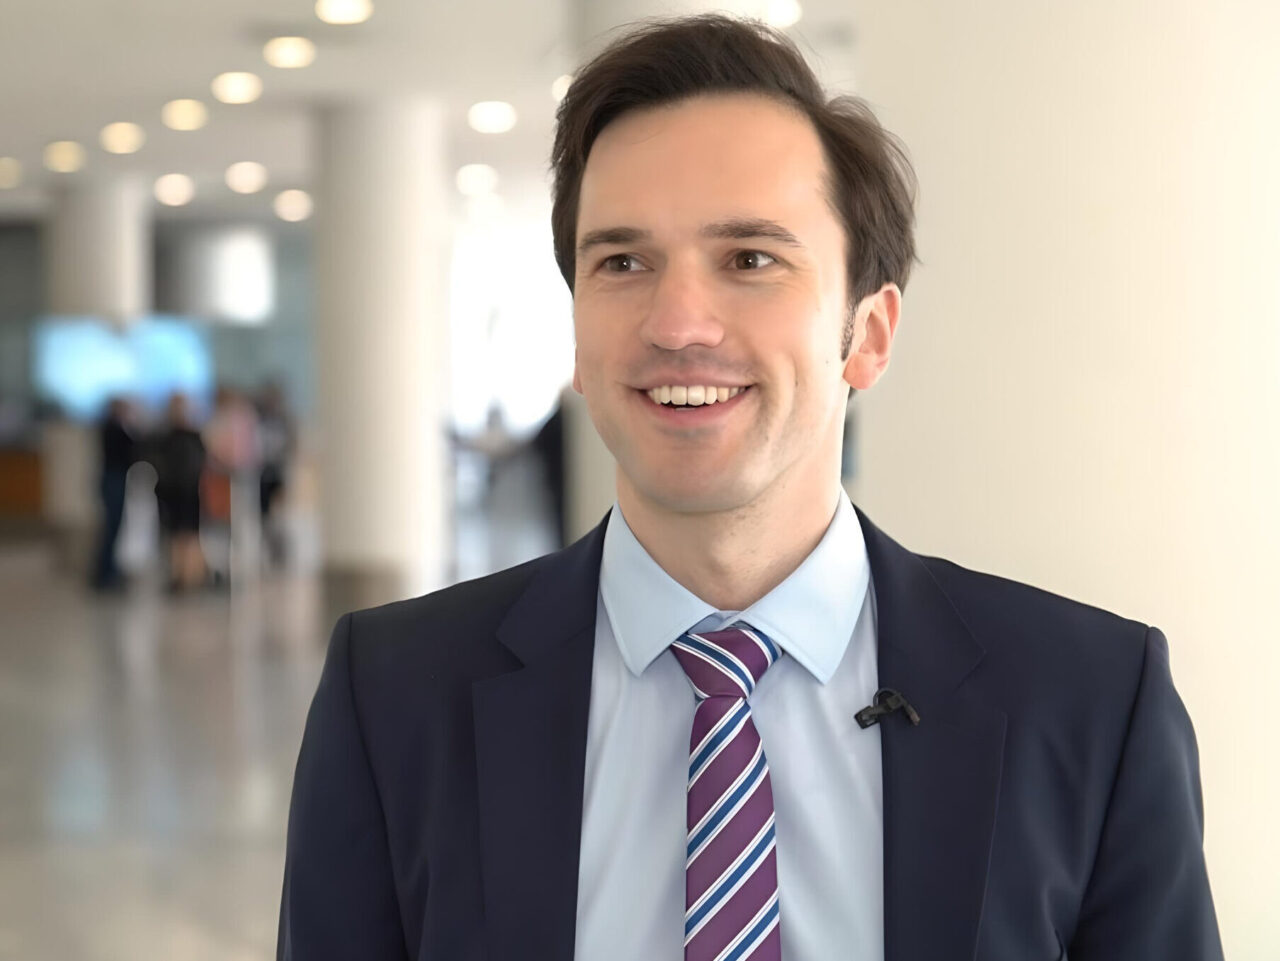 Nico Gagelmann: Methodological challenges in the development of endpoints for myelofibrosis clinical trials